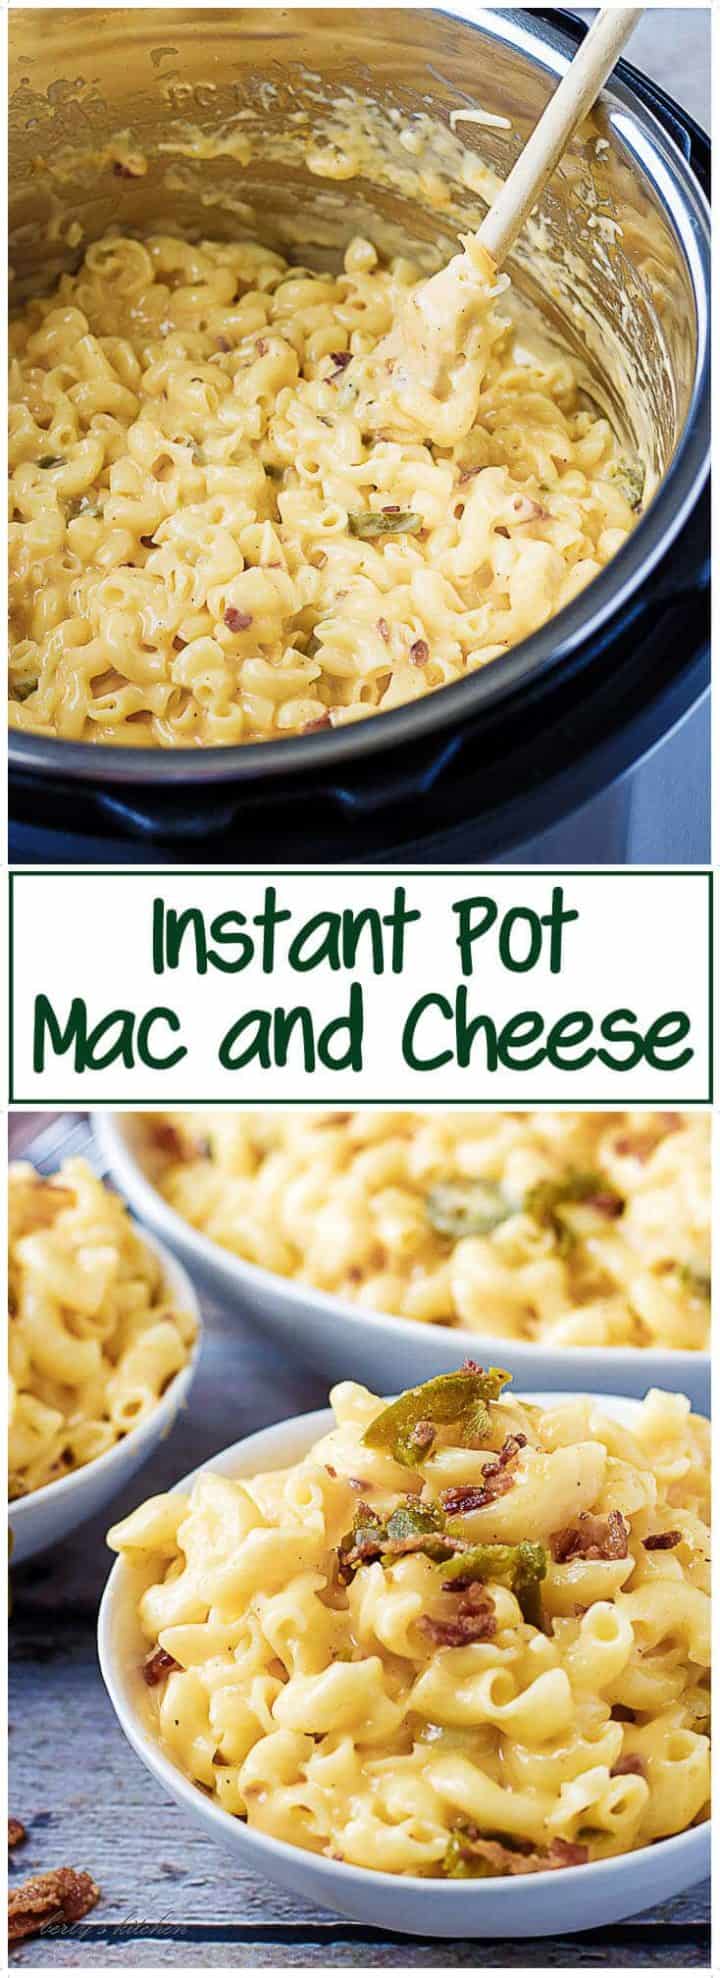 Collage of two photos of Instant Pot Mac and Cheese used for Pinterest sharing.